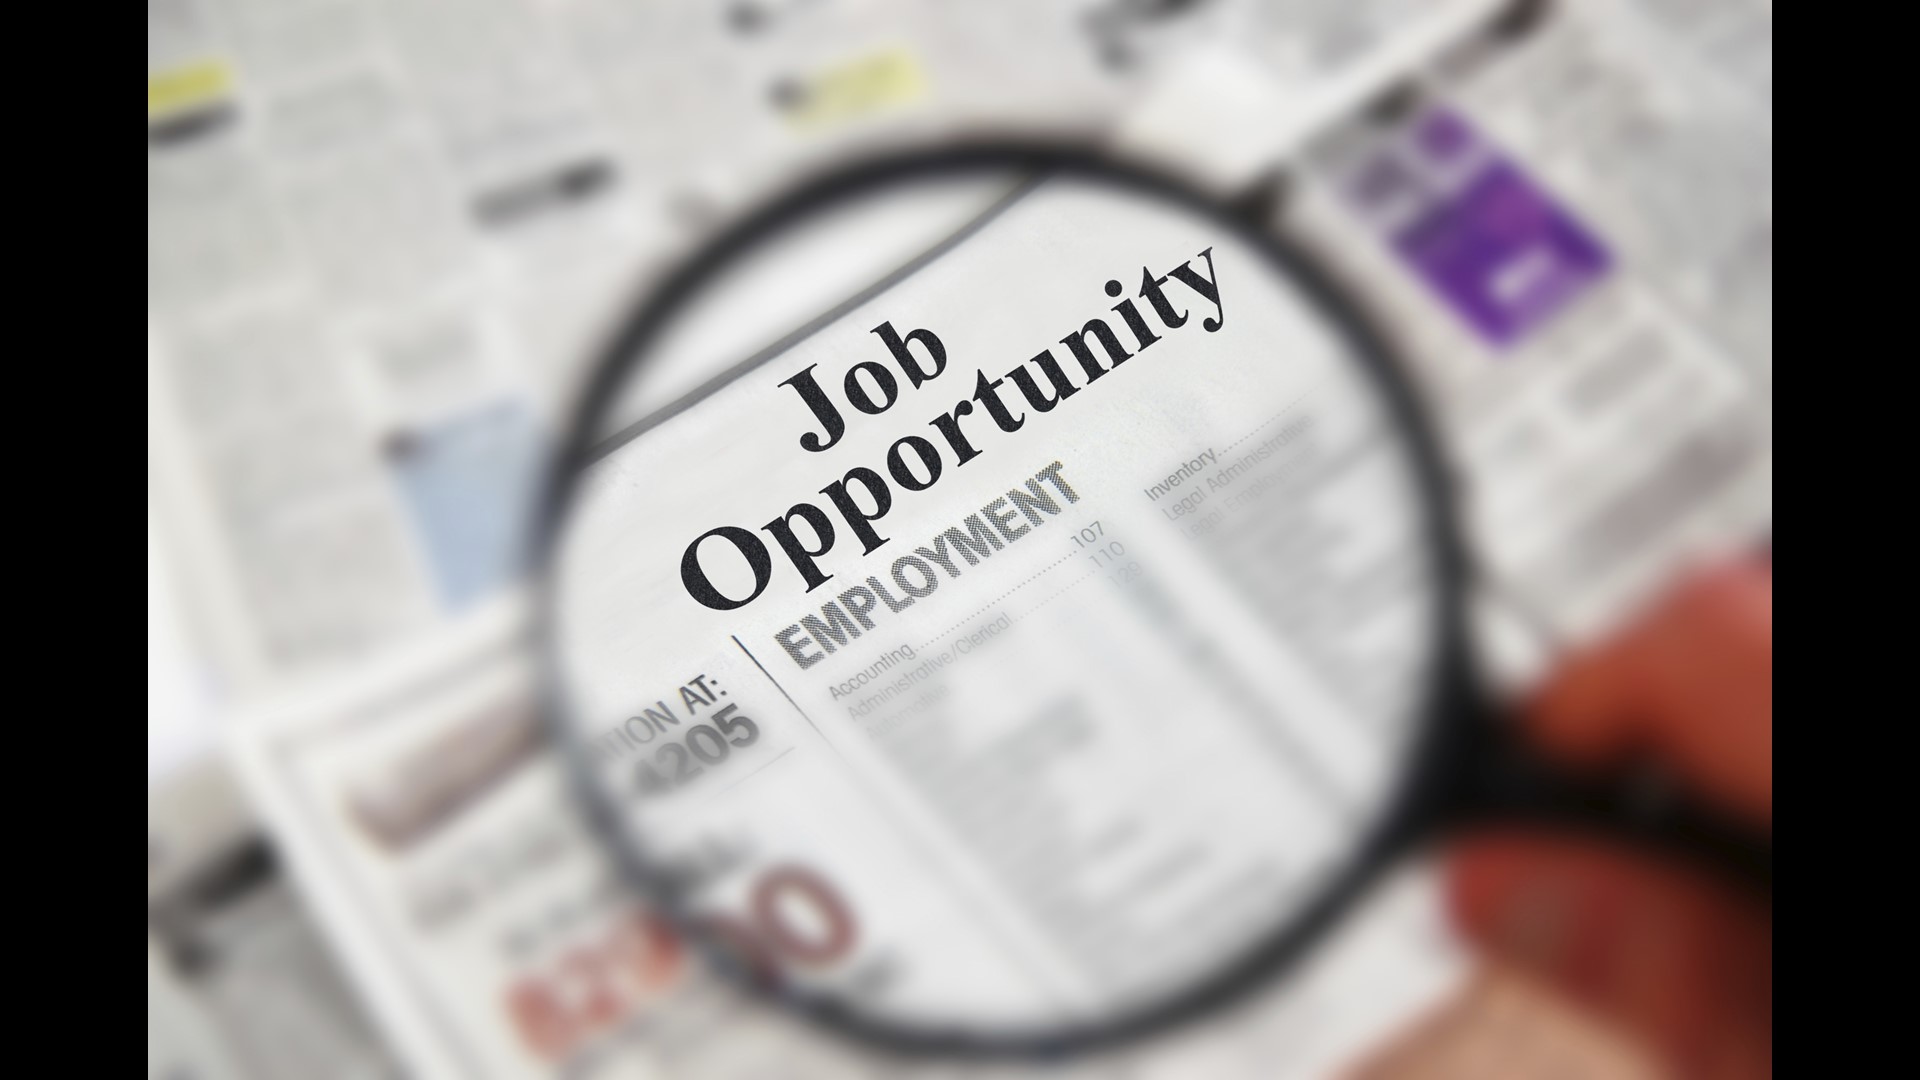 Seasonal job postings have popped up on city websites and could be good opportunities for students.